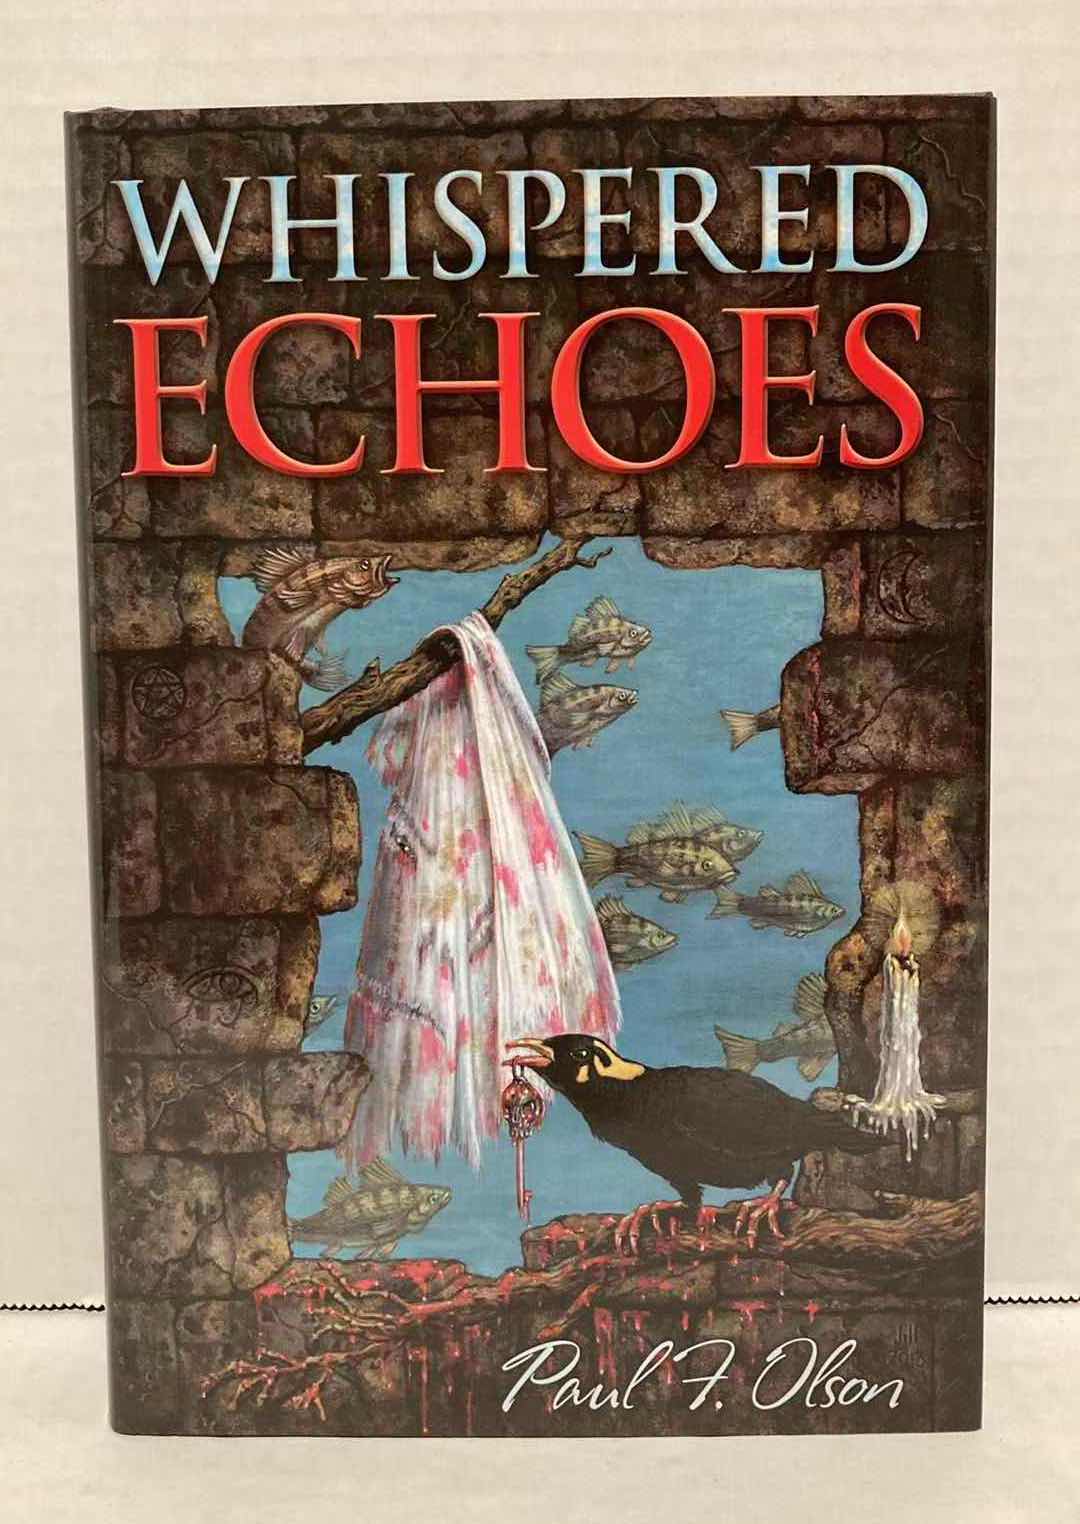 Photo 1 of PAUL F. OLSON - WHISPERED ECHOES BOOK SIGNED BY PAUL F. OLSON